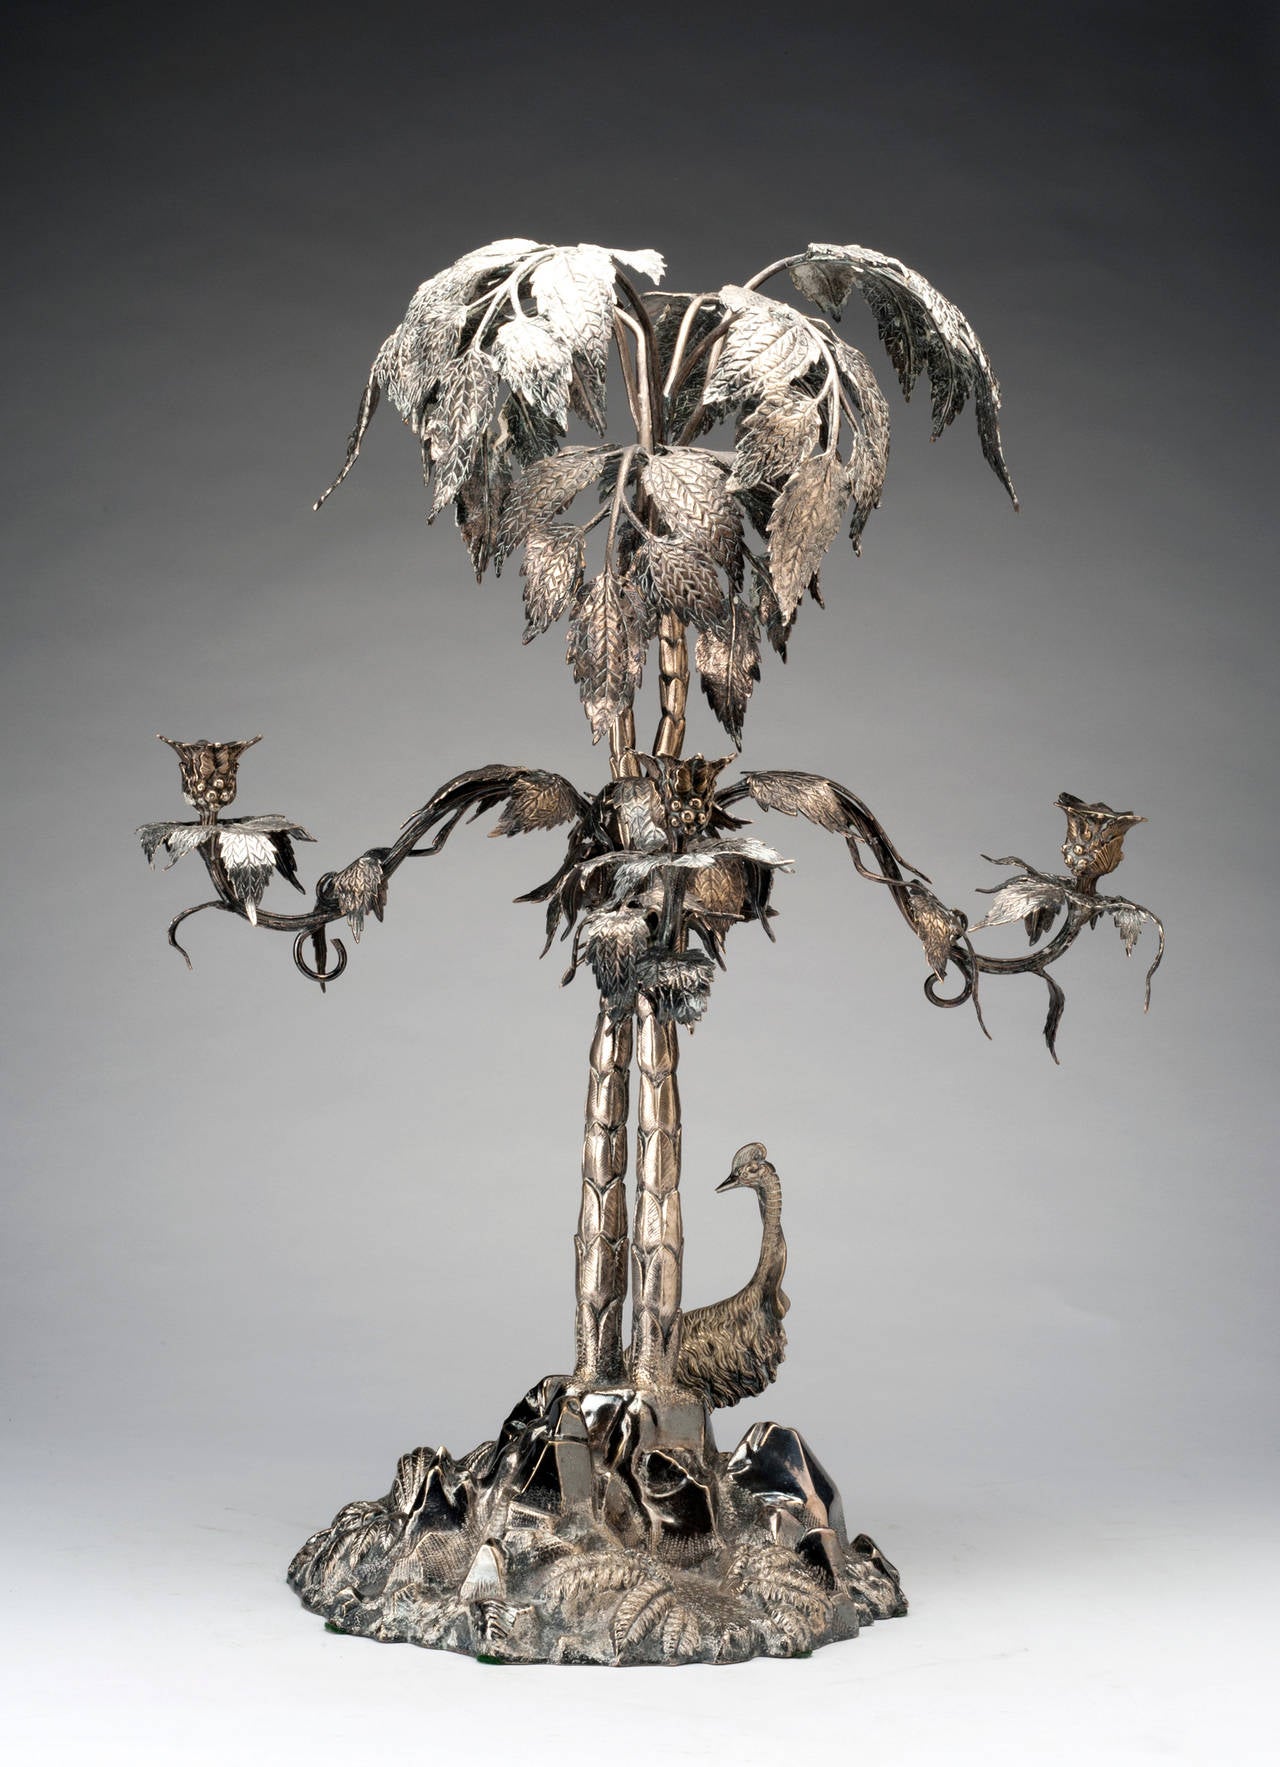 An impressive piece from Elkington Silver, this candlestick accommodates up to four candles on its distinctive arms. The center is crafted in the form of a tree, with a base scene depicting stones, foliage and a flightless bird. The piece measures